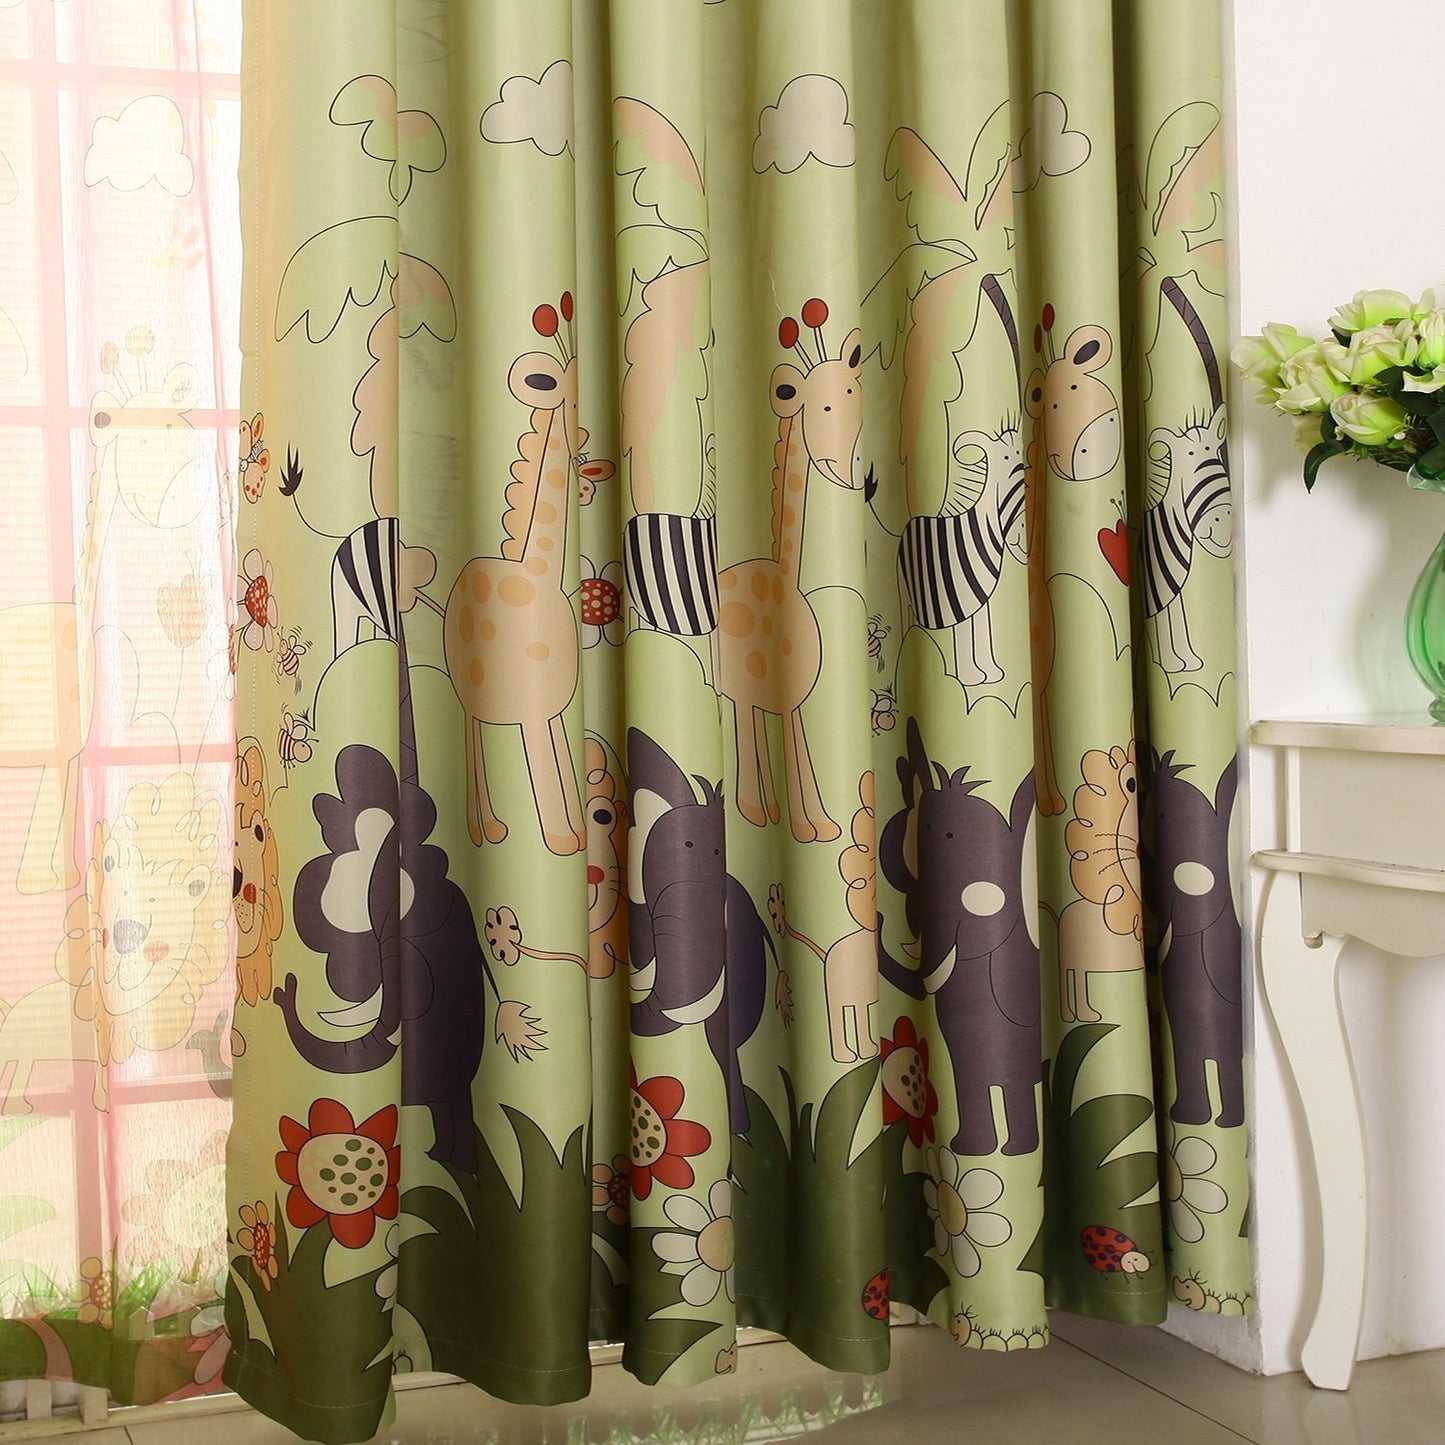 Gyrohomestore Printed Top Grommets Energy Saving Lovely Kids Blackout Curtains